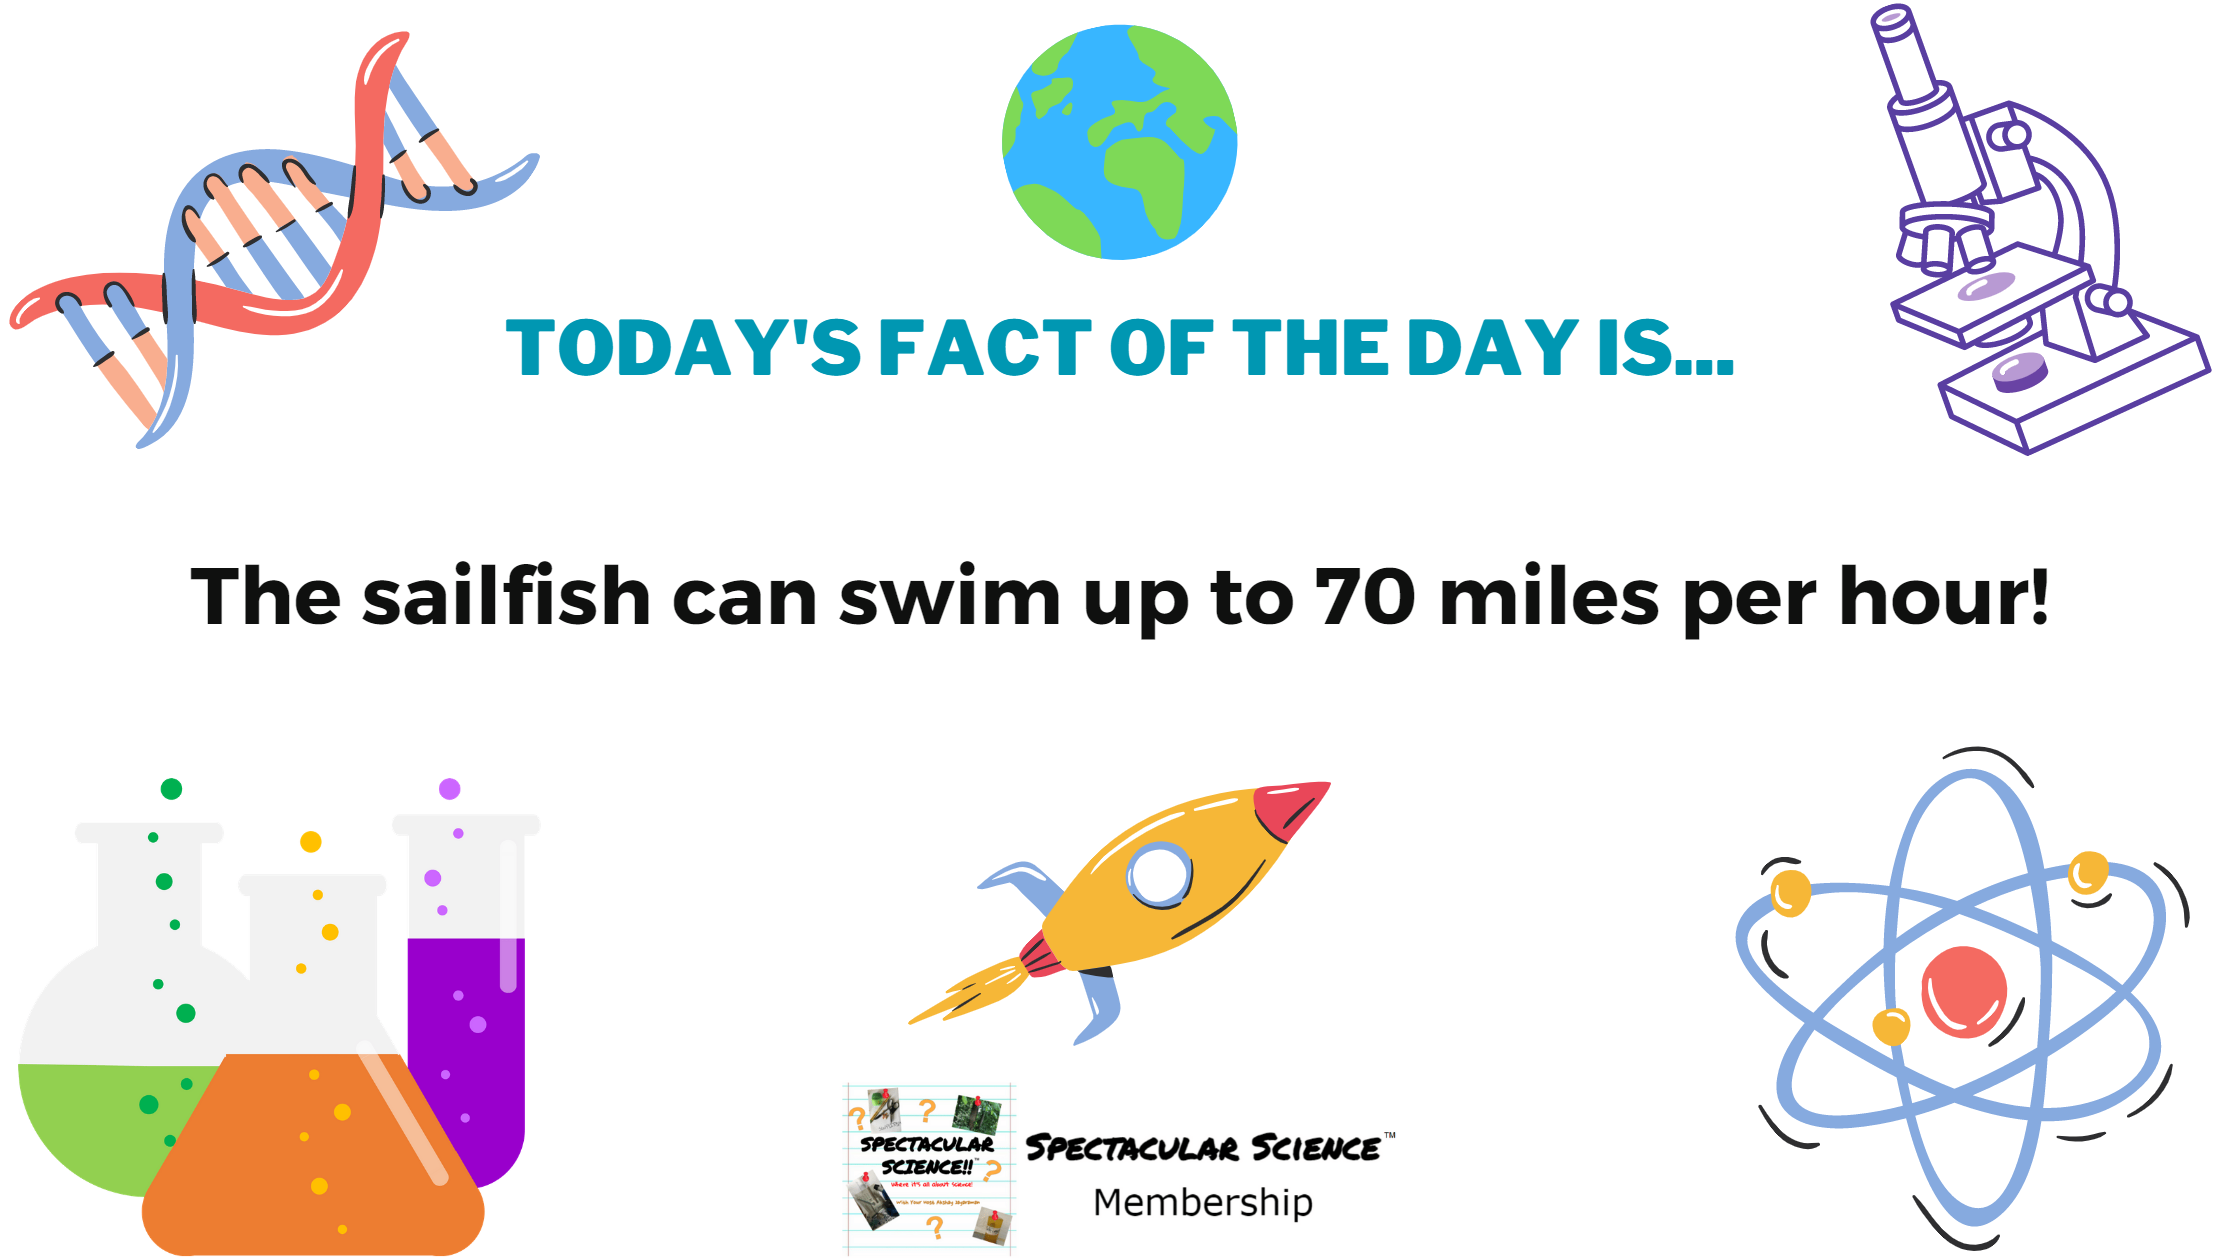 Fact of the Day Image March 15th